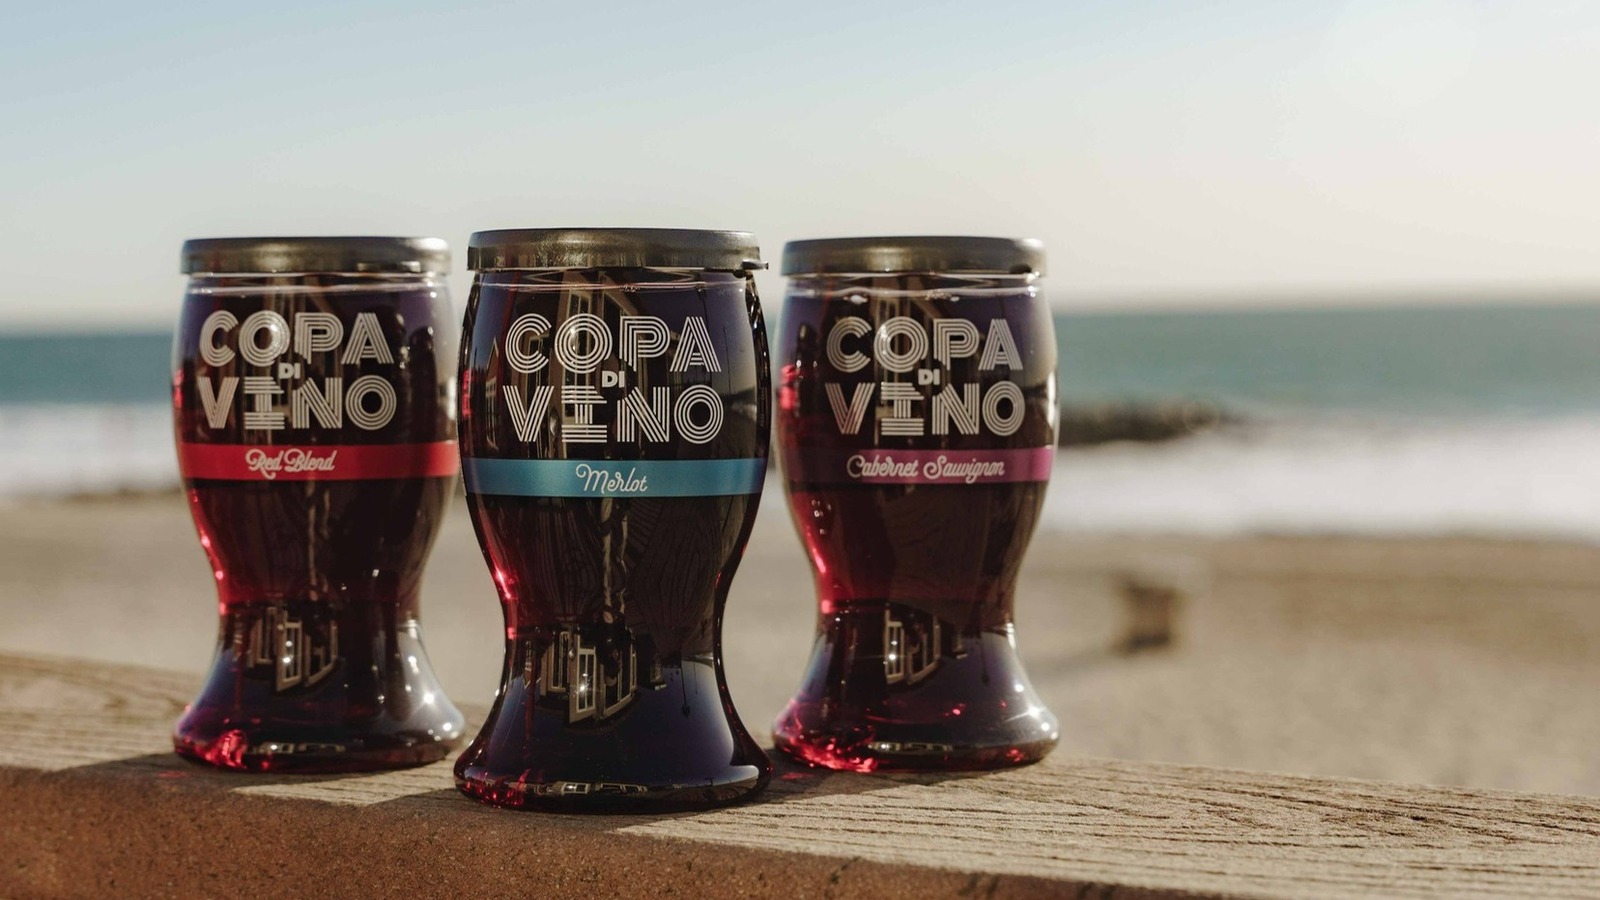 https://www.mashed.com/img/gallery/what-happened-to-copa-di-vino-after-shark-tank-upgrade/l-intro-1693405672.jpg